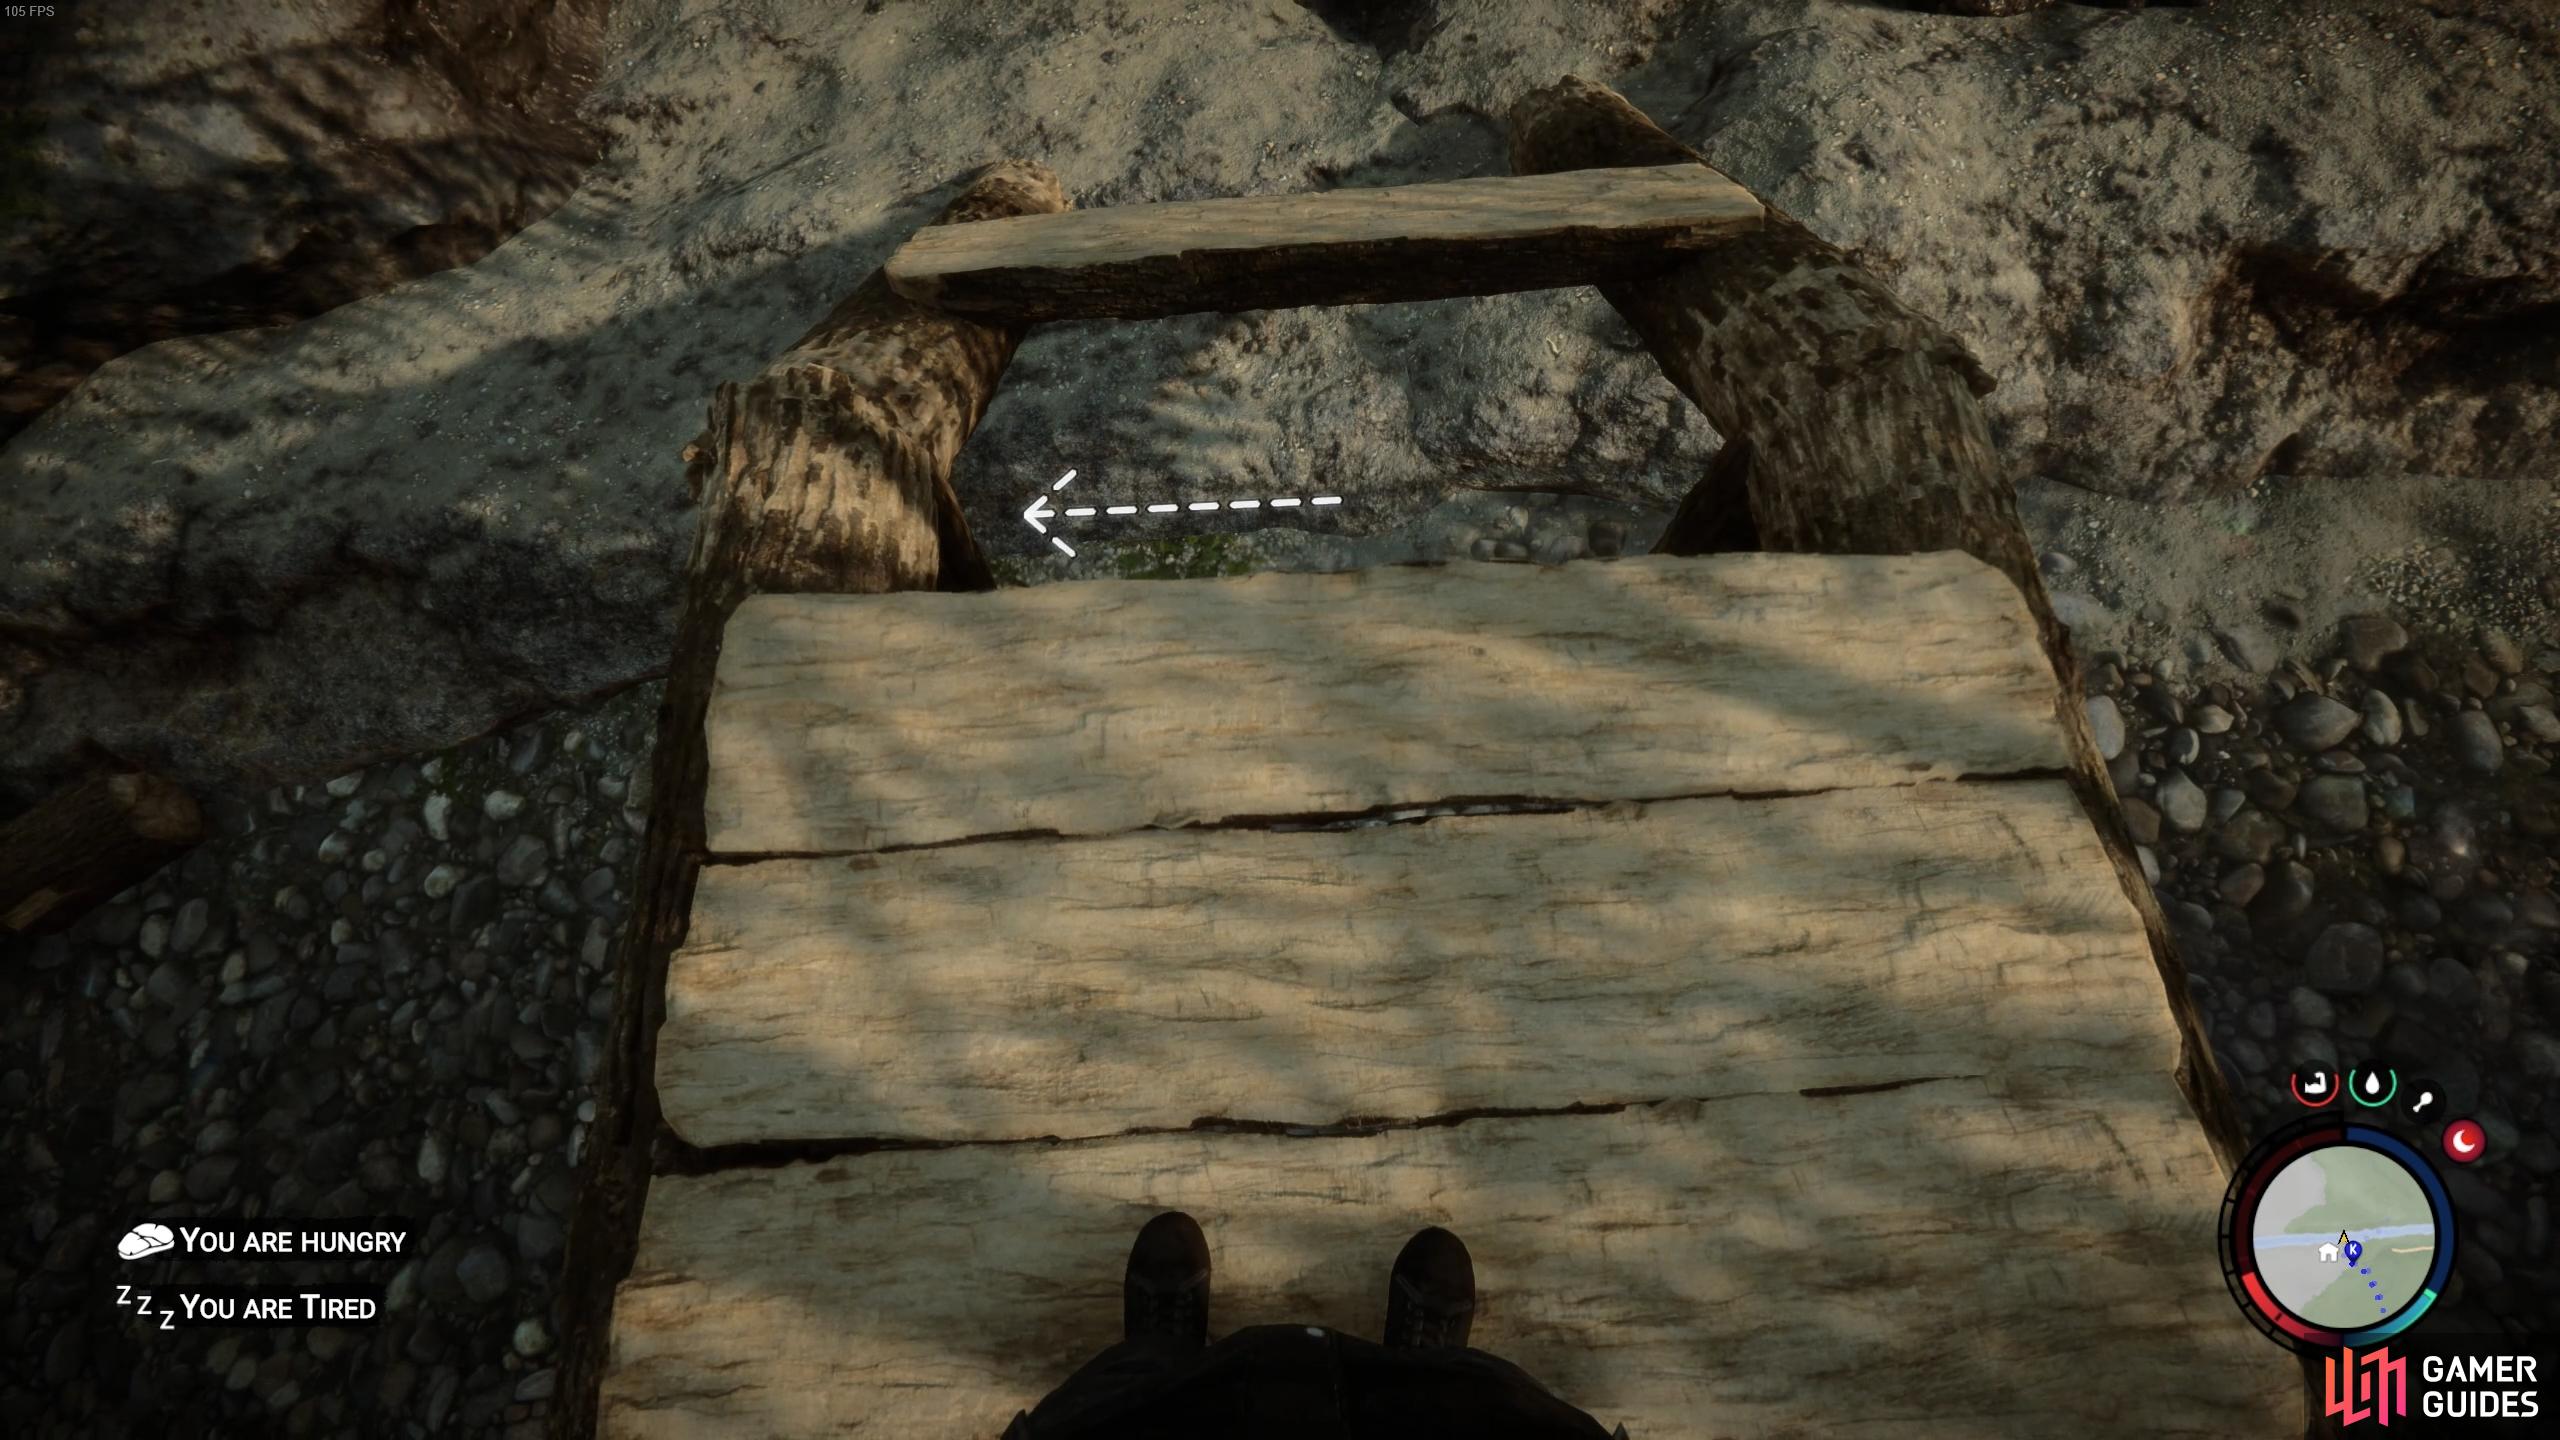 You can place the split logs along the bridge structure to create flooring.